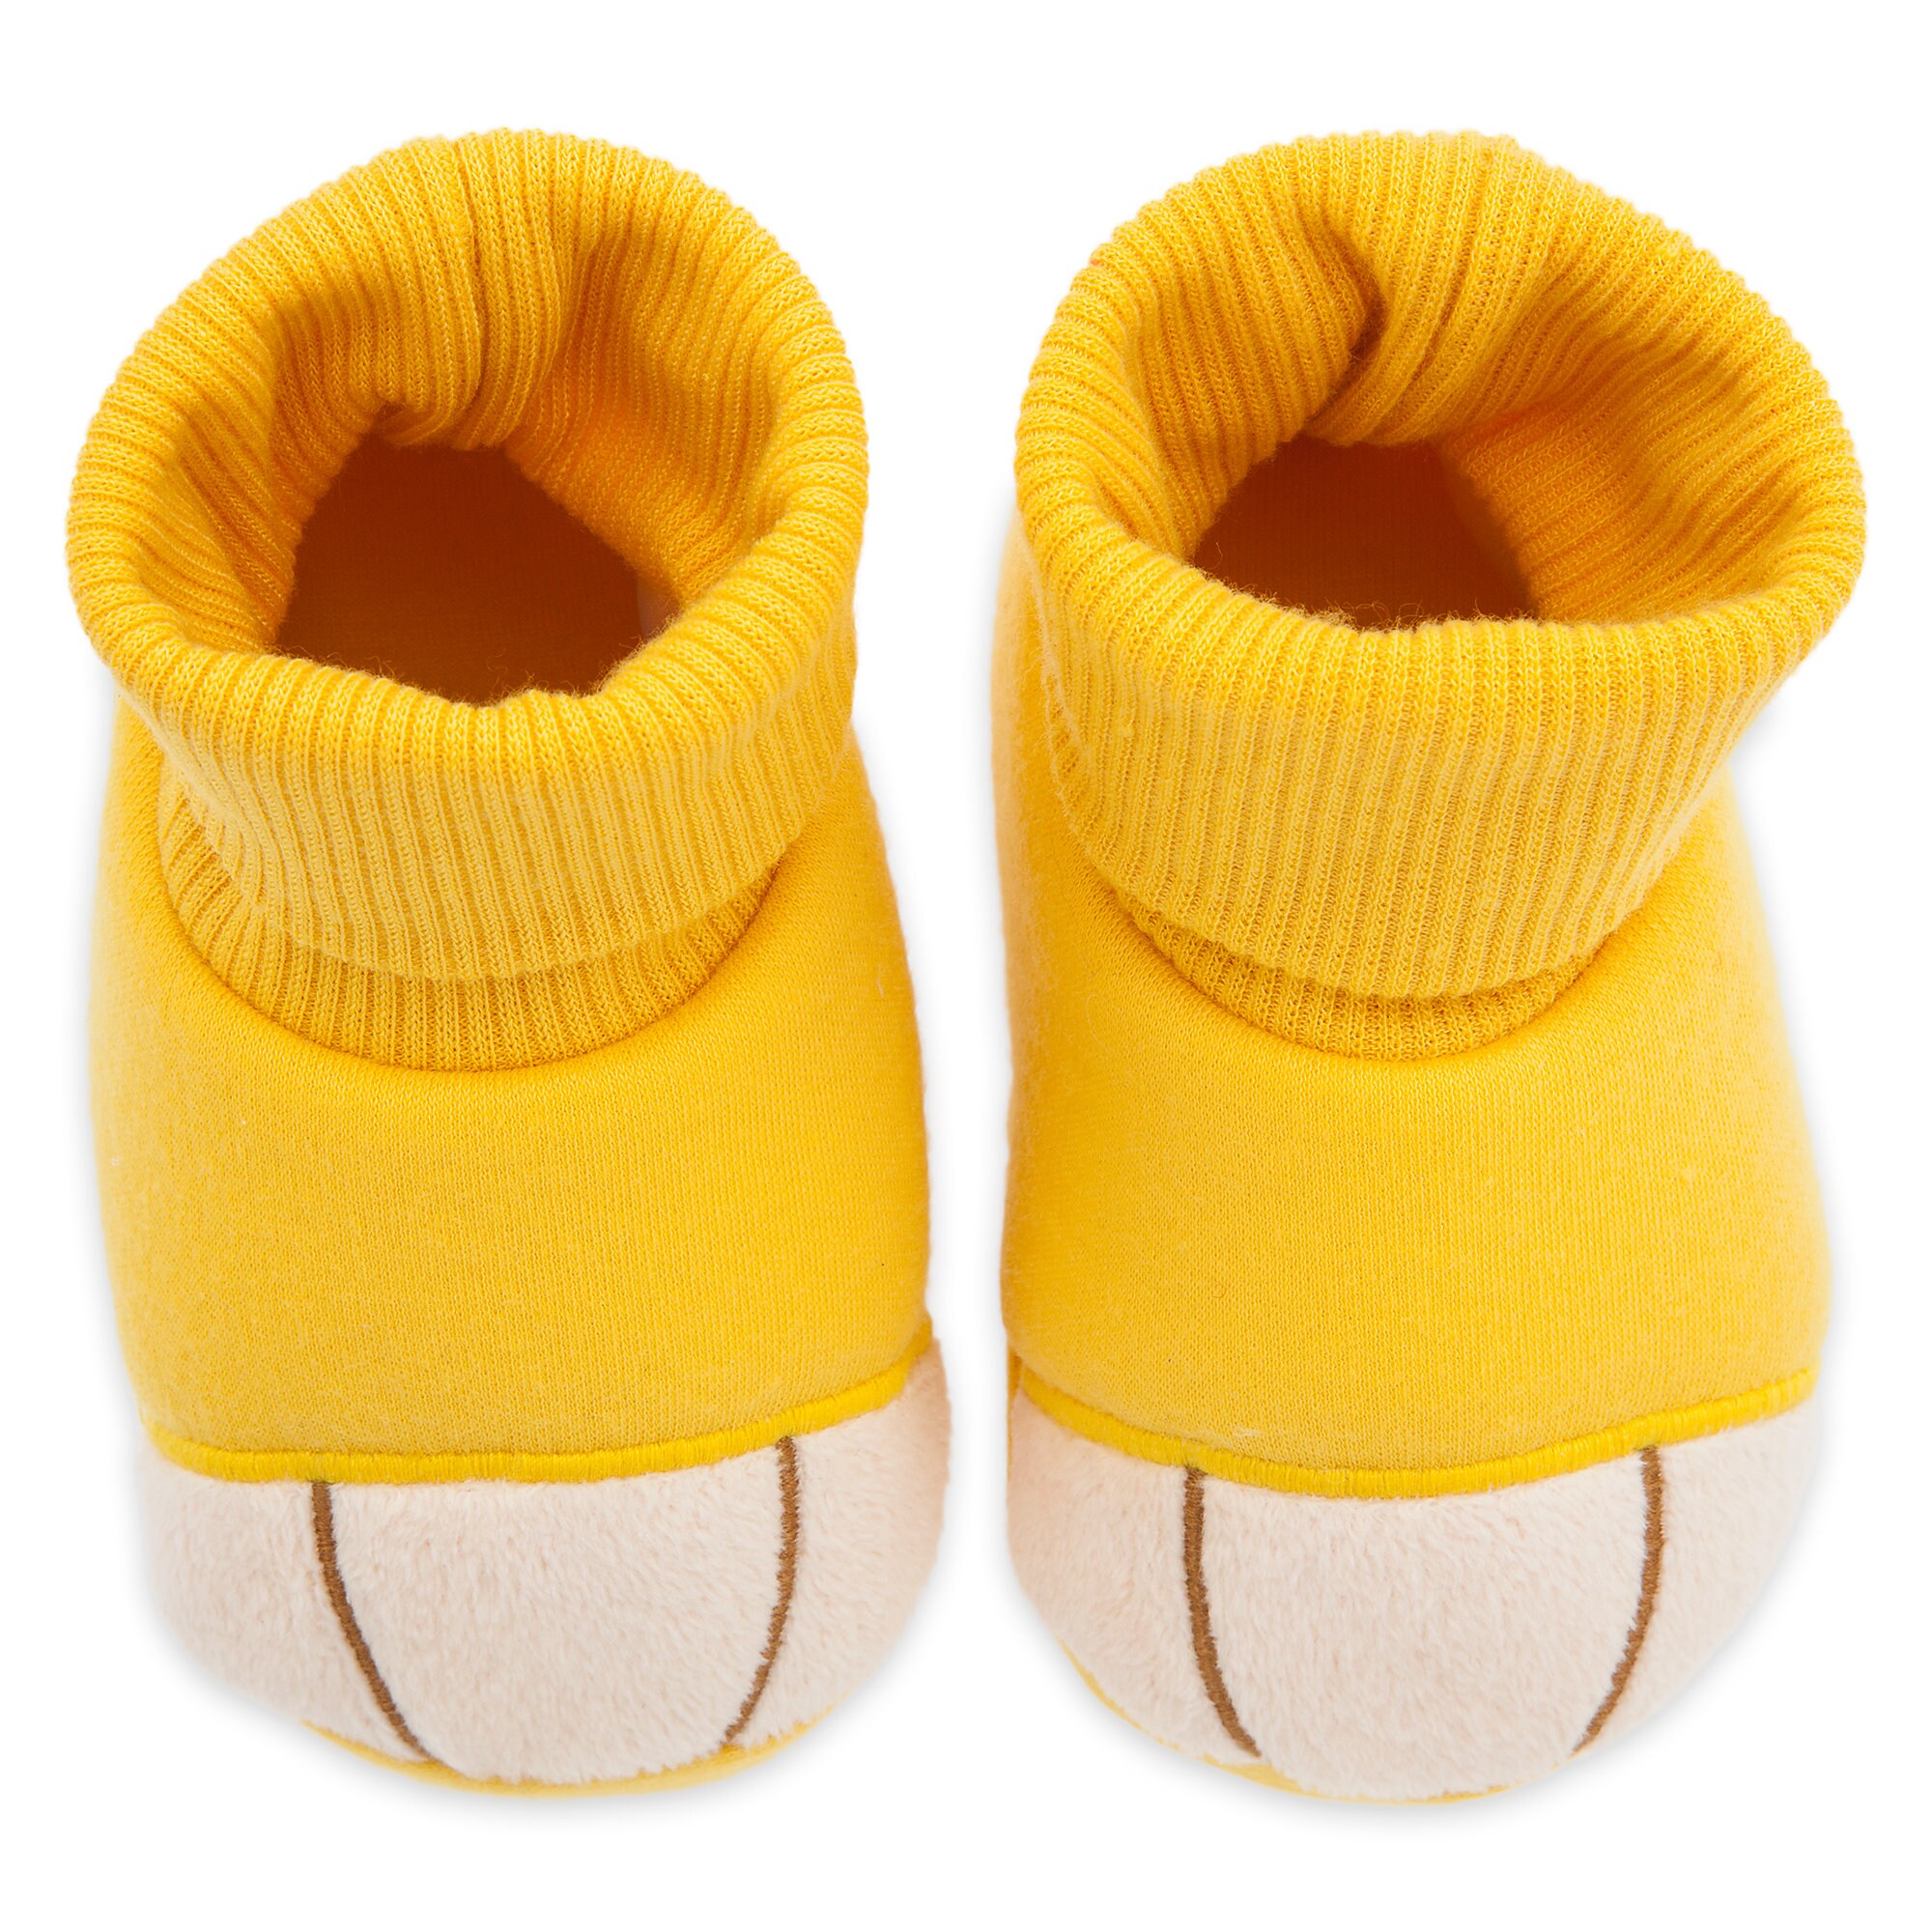 Simba Costume Shoes for Baby released today – Dis Merchandise News